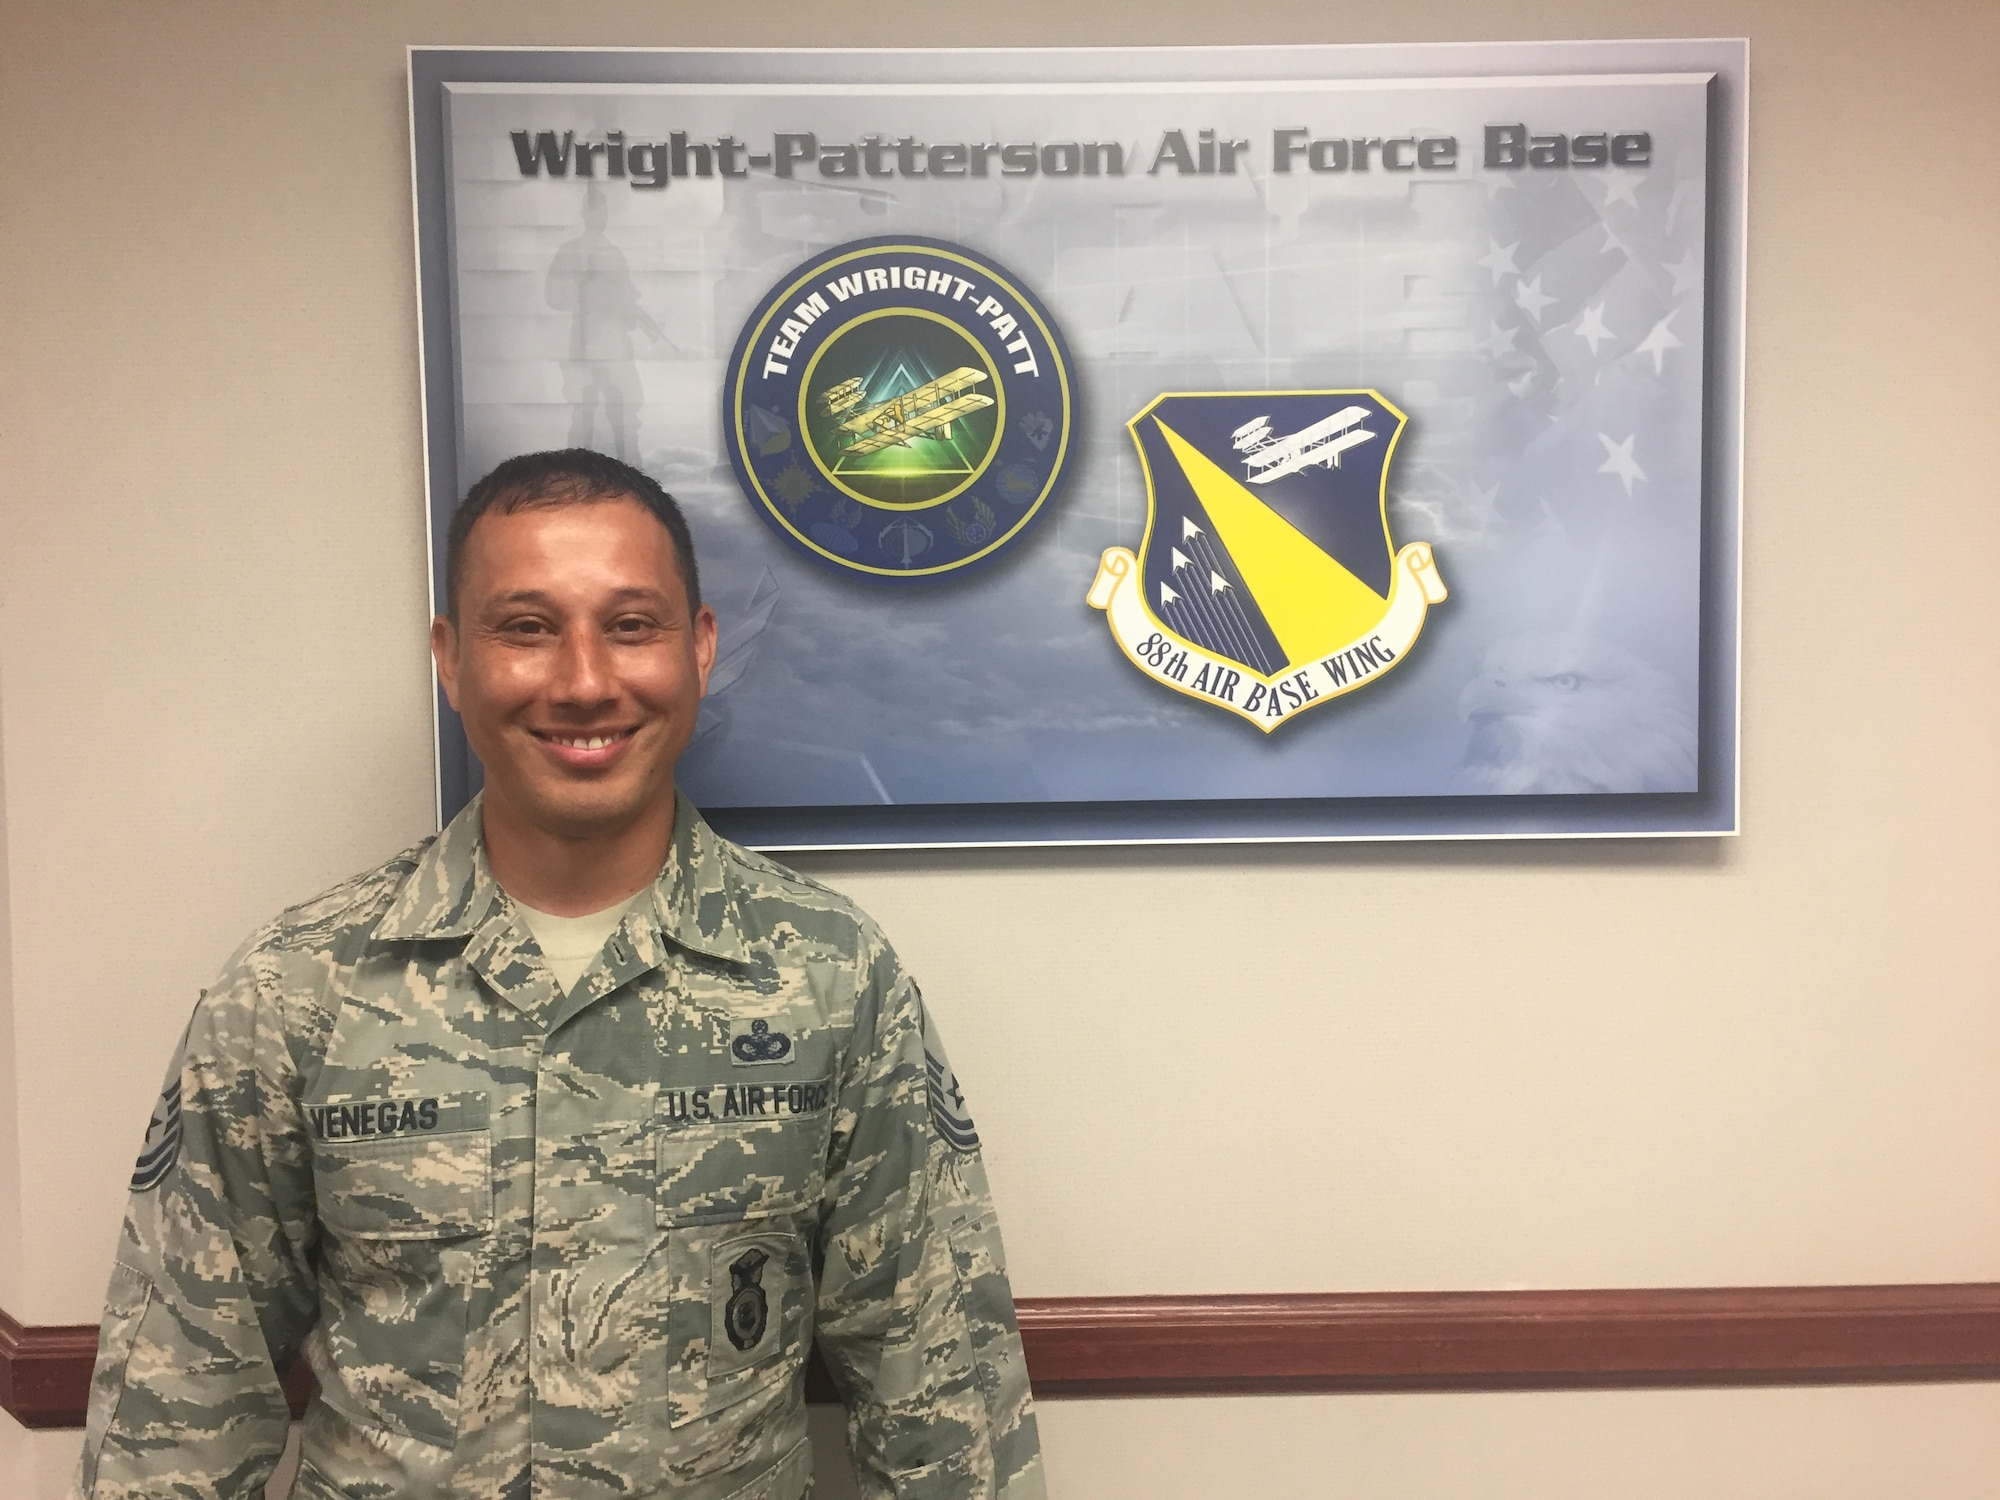 Master Sgt. Martin Venegas is a member of the LGBT (Lesbian, Gay, Bisexual and Transgender) Awareness Month Special Observance Committee at Wright-Patterson Air Force Base. The committee will host a free 5K color fun run/walk on June 22, starting at 8 a.m. at the Rod and Gun Club, Hebble Creek Road, Area A. The public and base community are invited to participate. (Skywrighter photo/Amy Rollins)